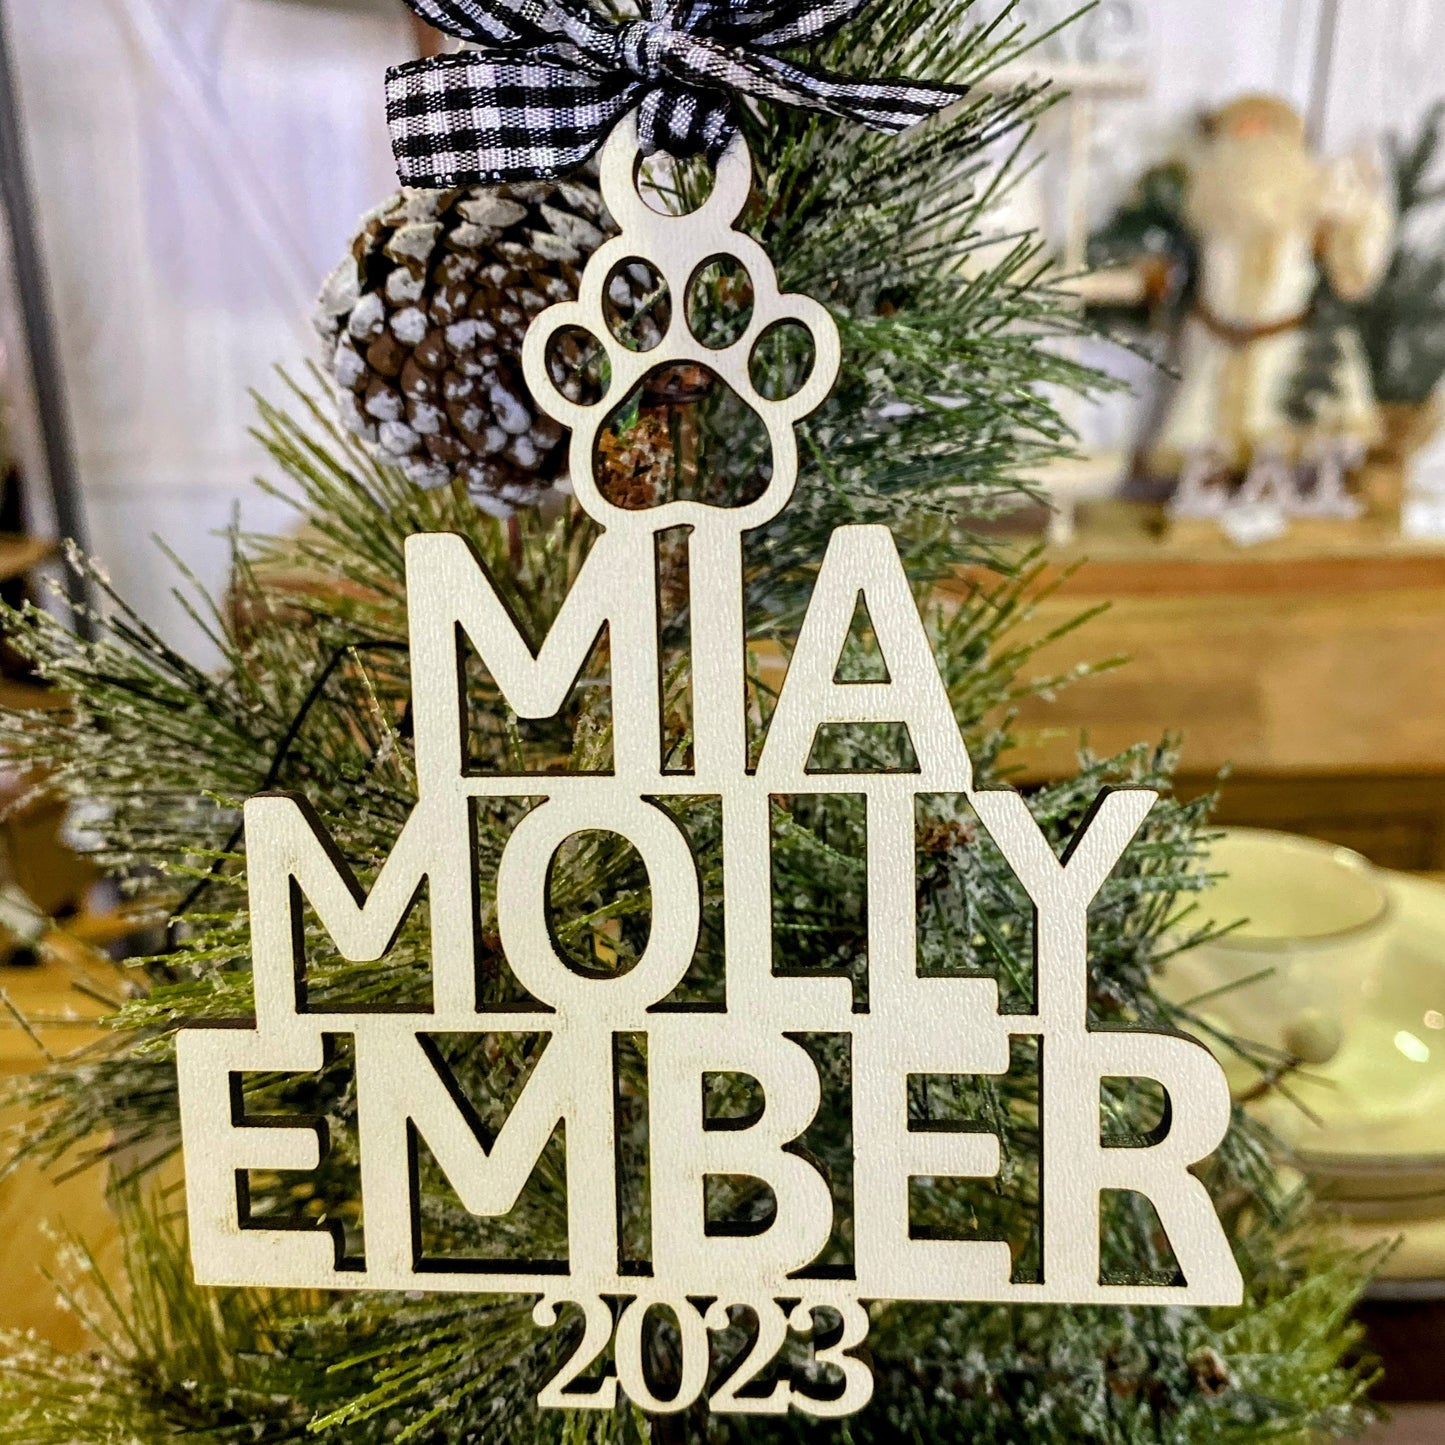 Ornament with Pet Names